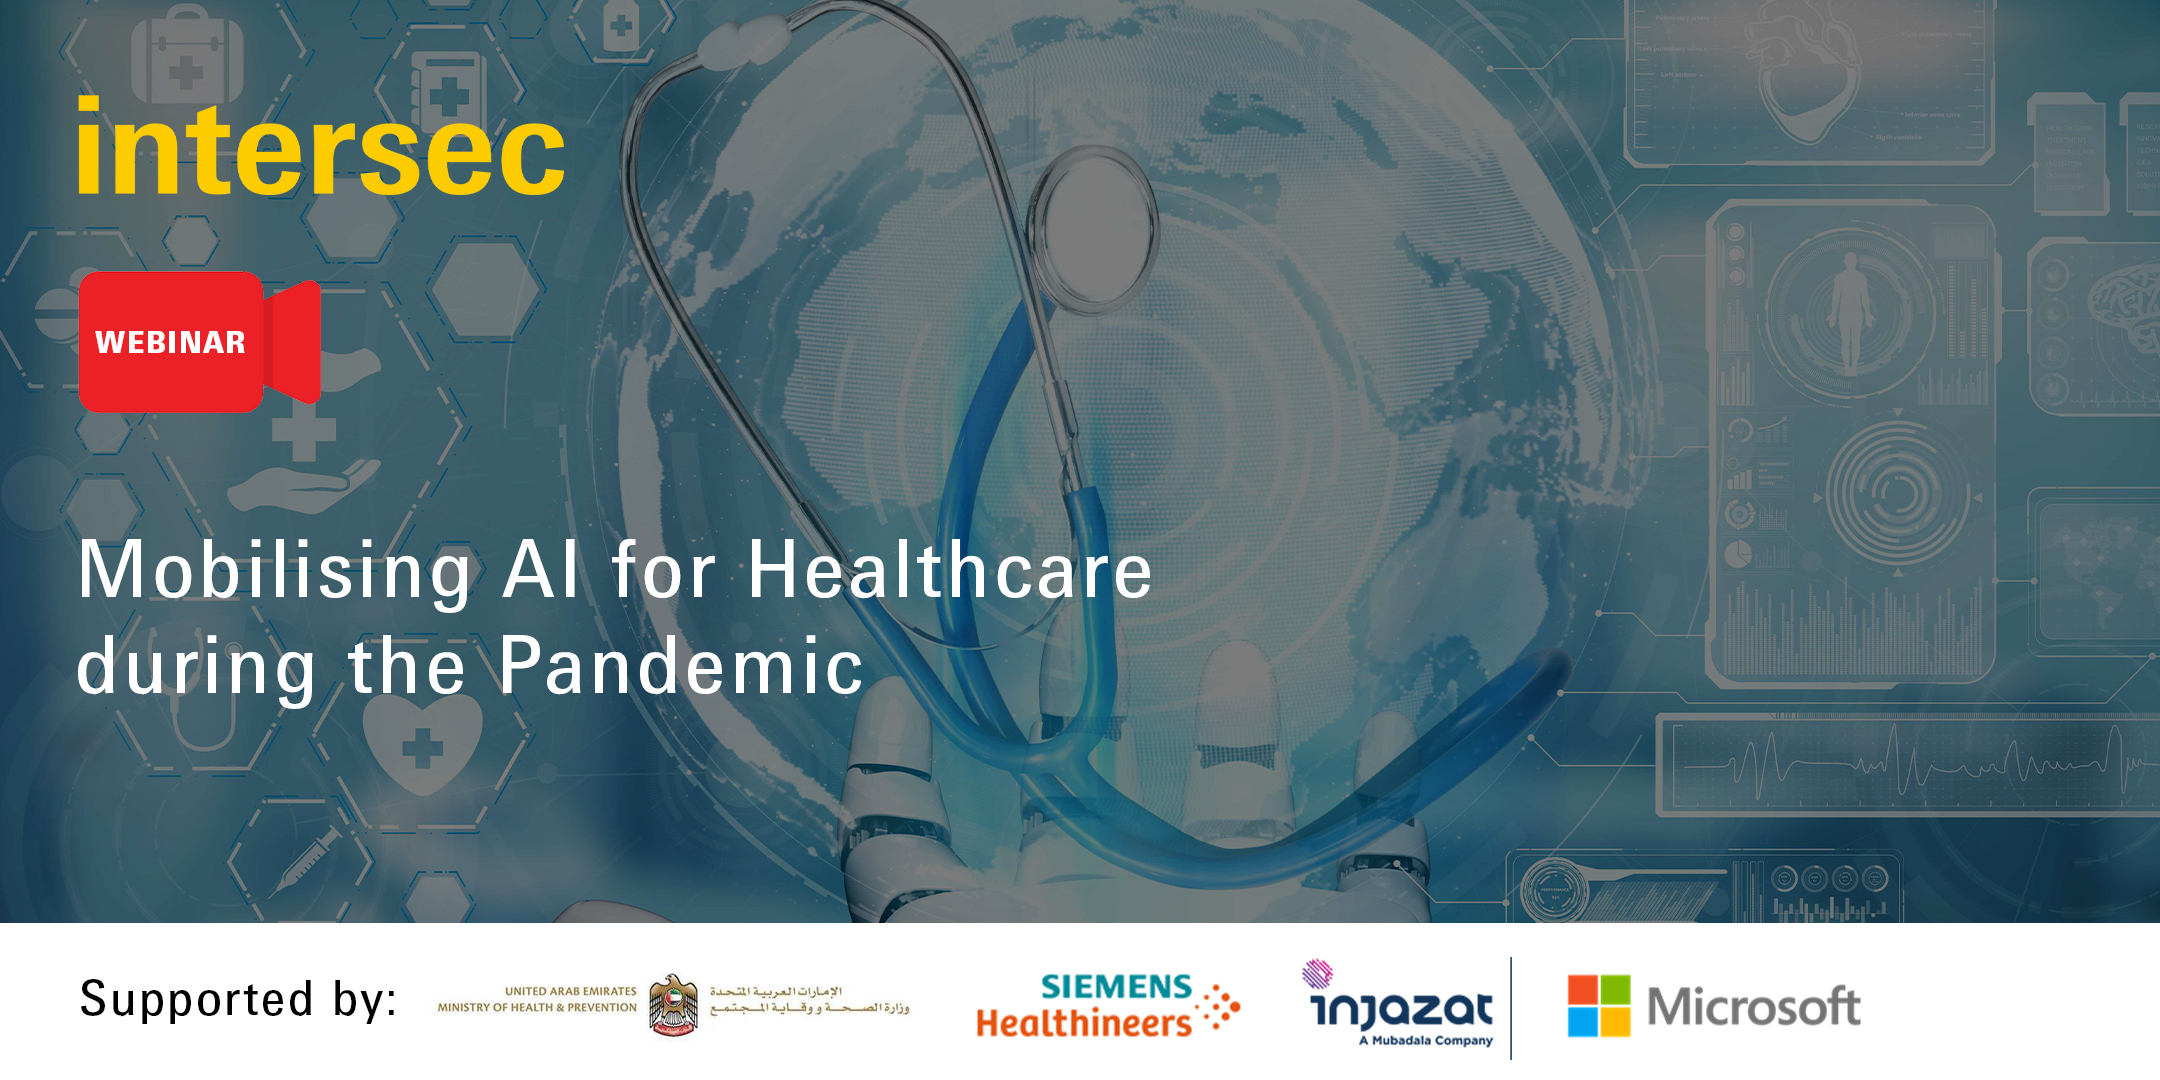 Mobilizing AI for Healthcare during the Pandemic